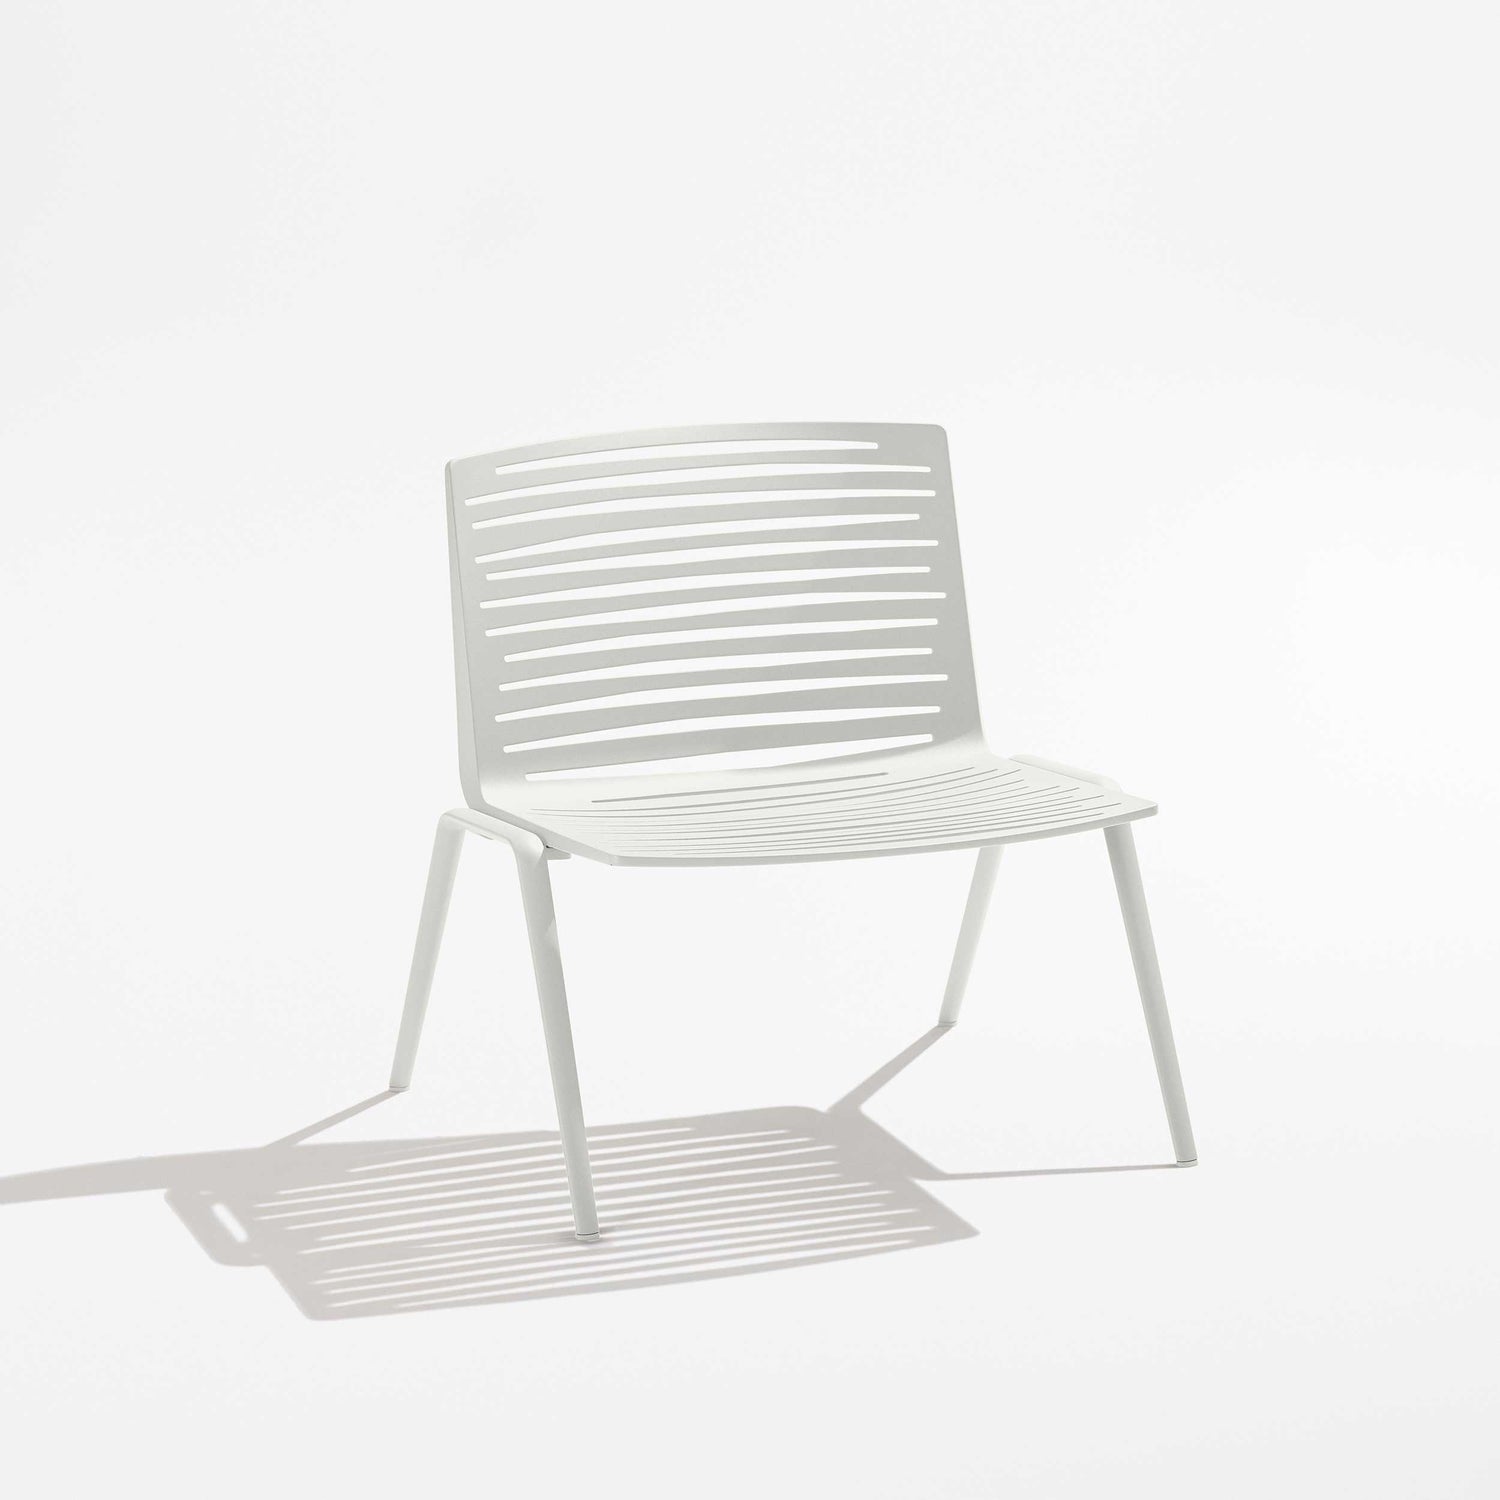 product-color-Bianco, White